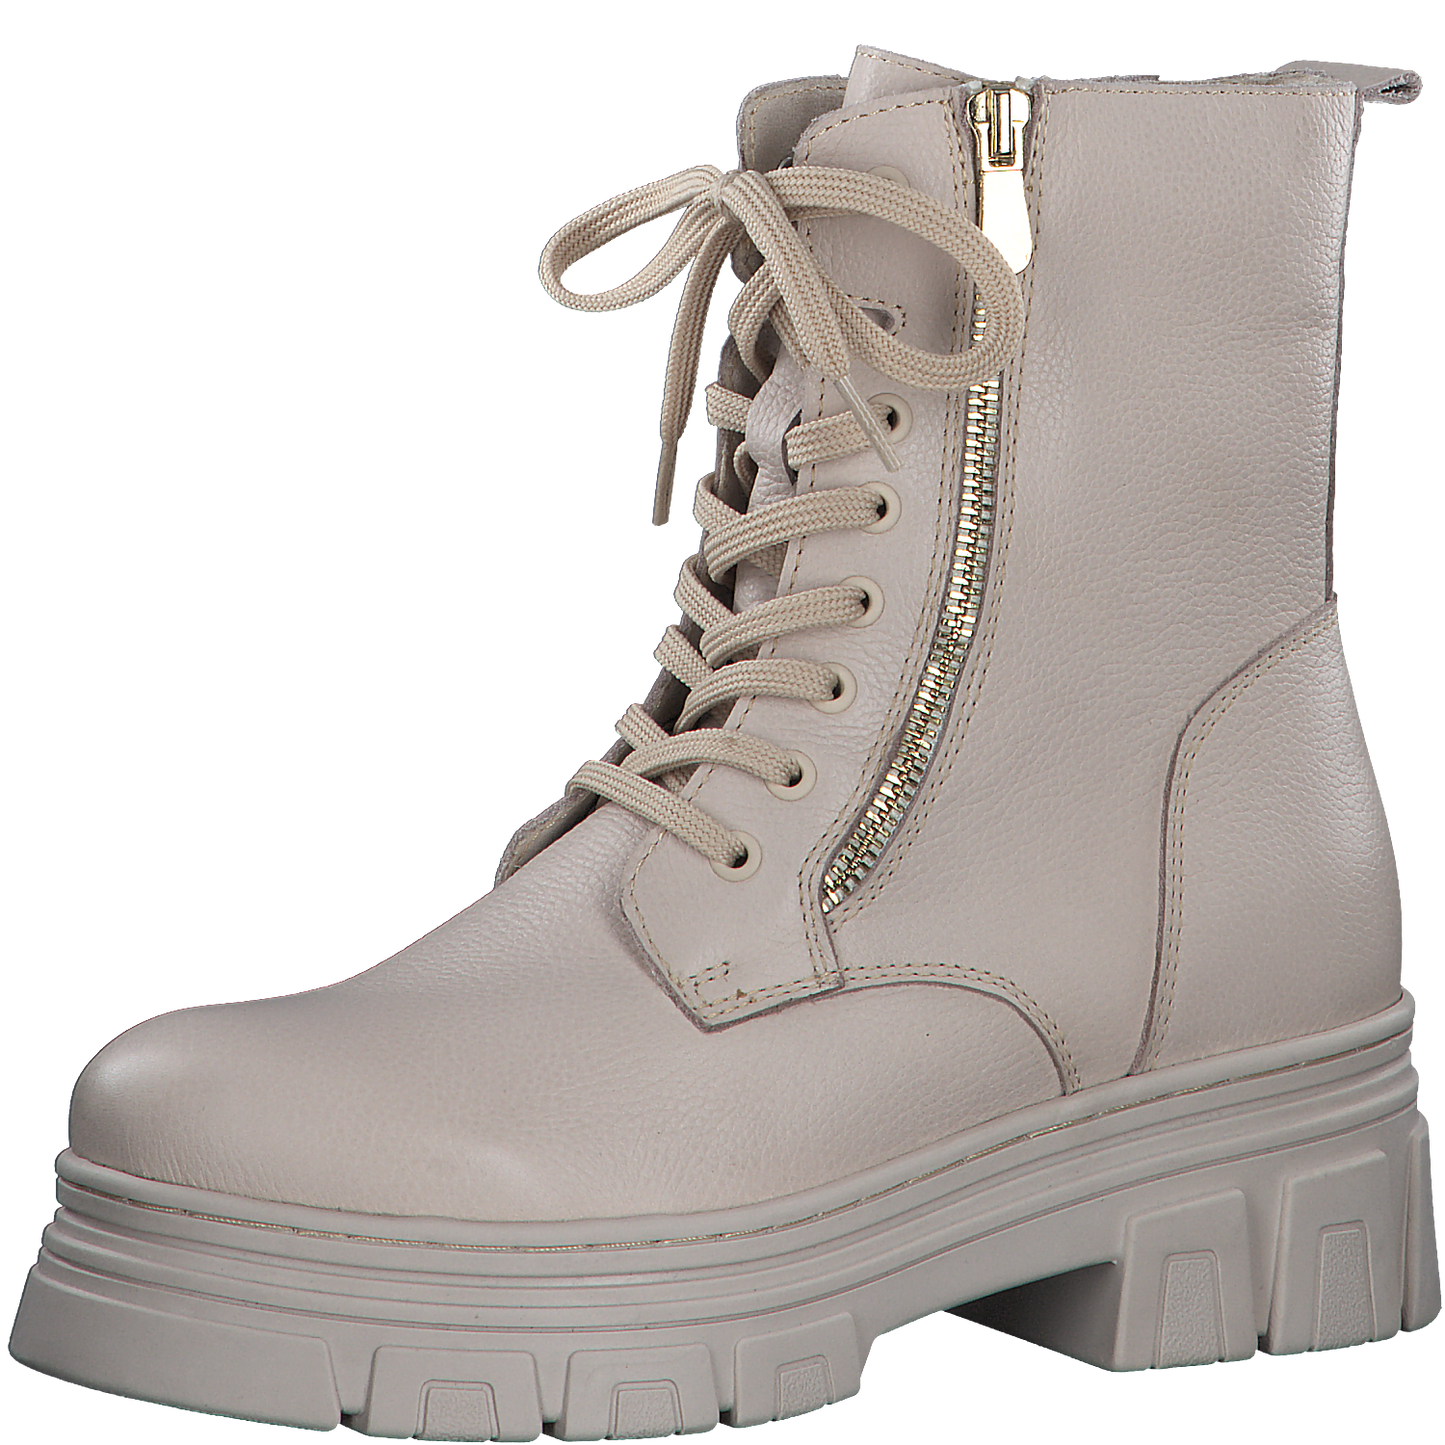 Marco Tozzi Lace-up Boots - cream